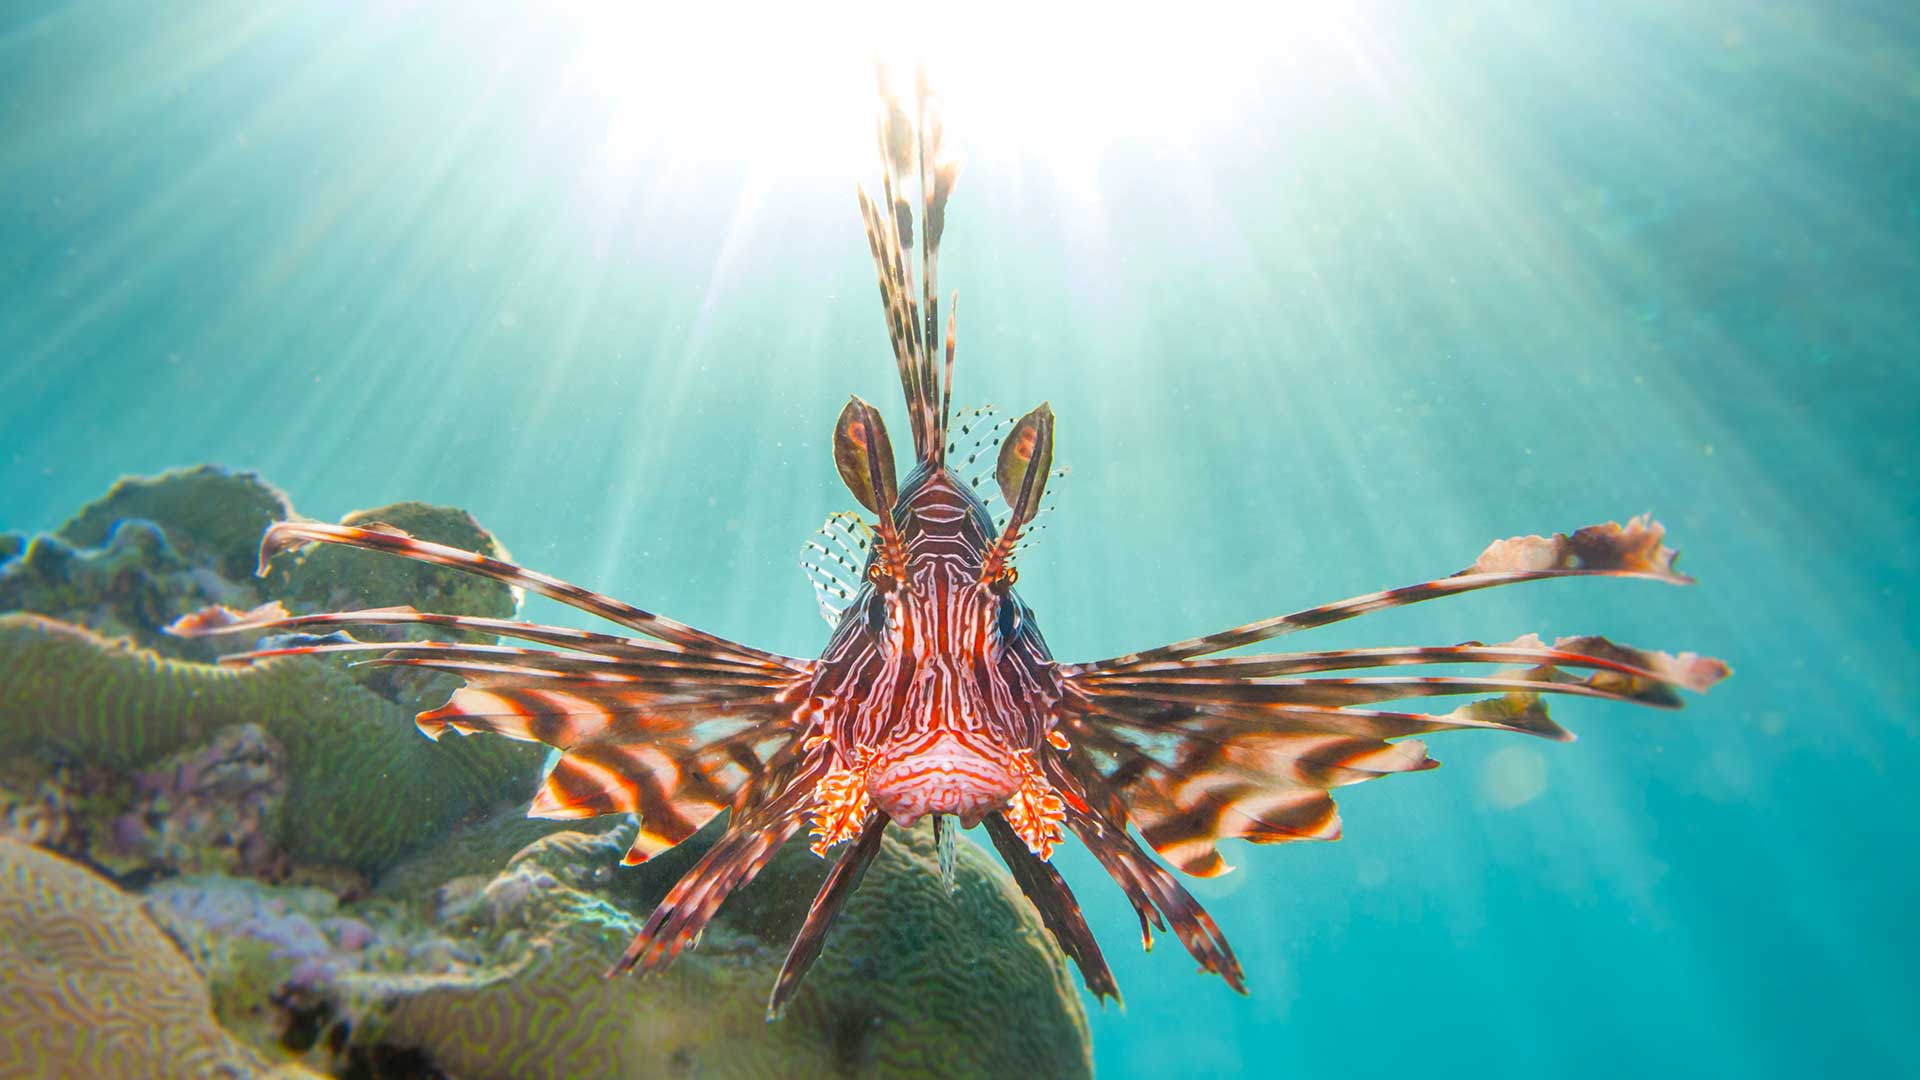 Lionfish swimming near coral in the ocean